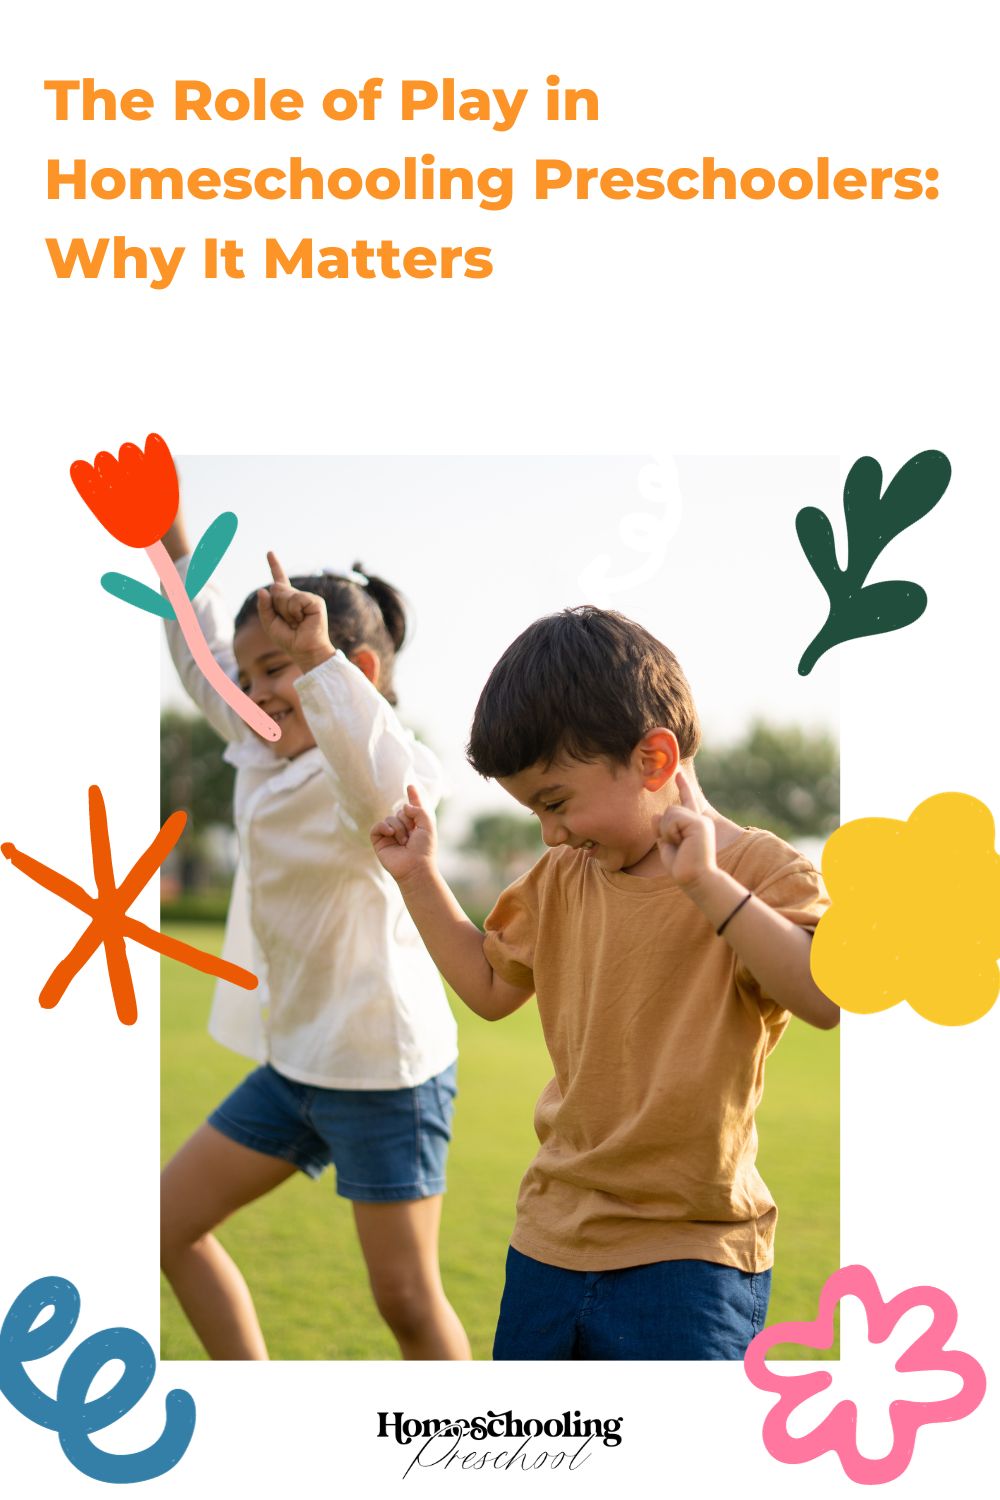 The Role of Play in Homeschooling Preschoolers Why It Matters